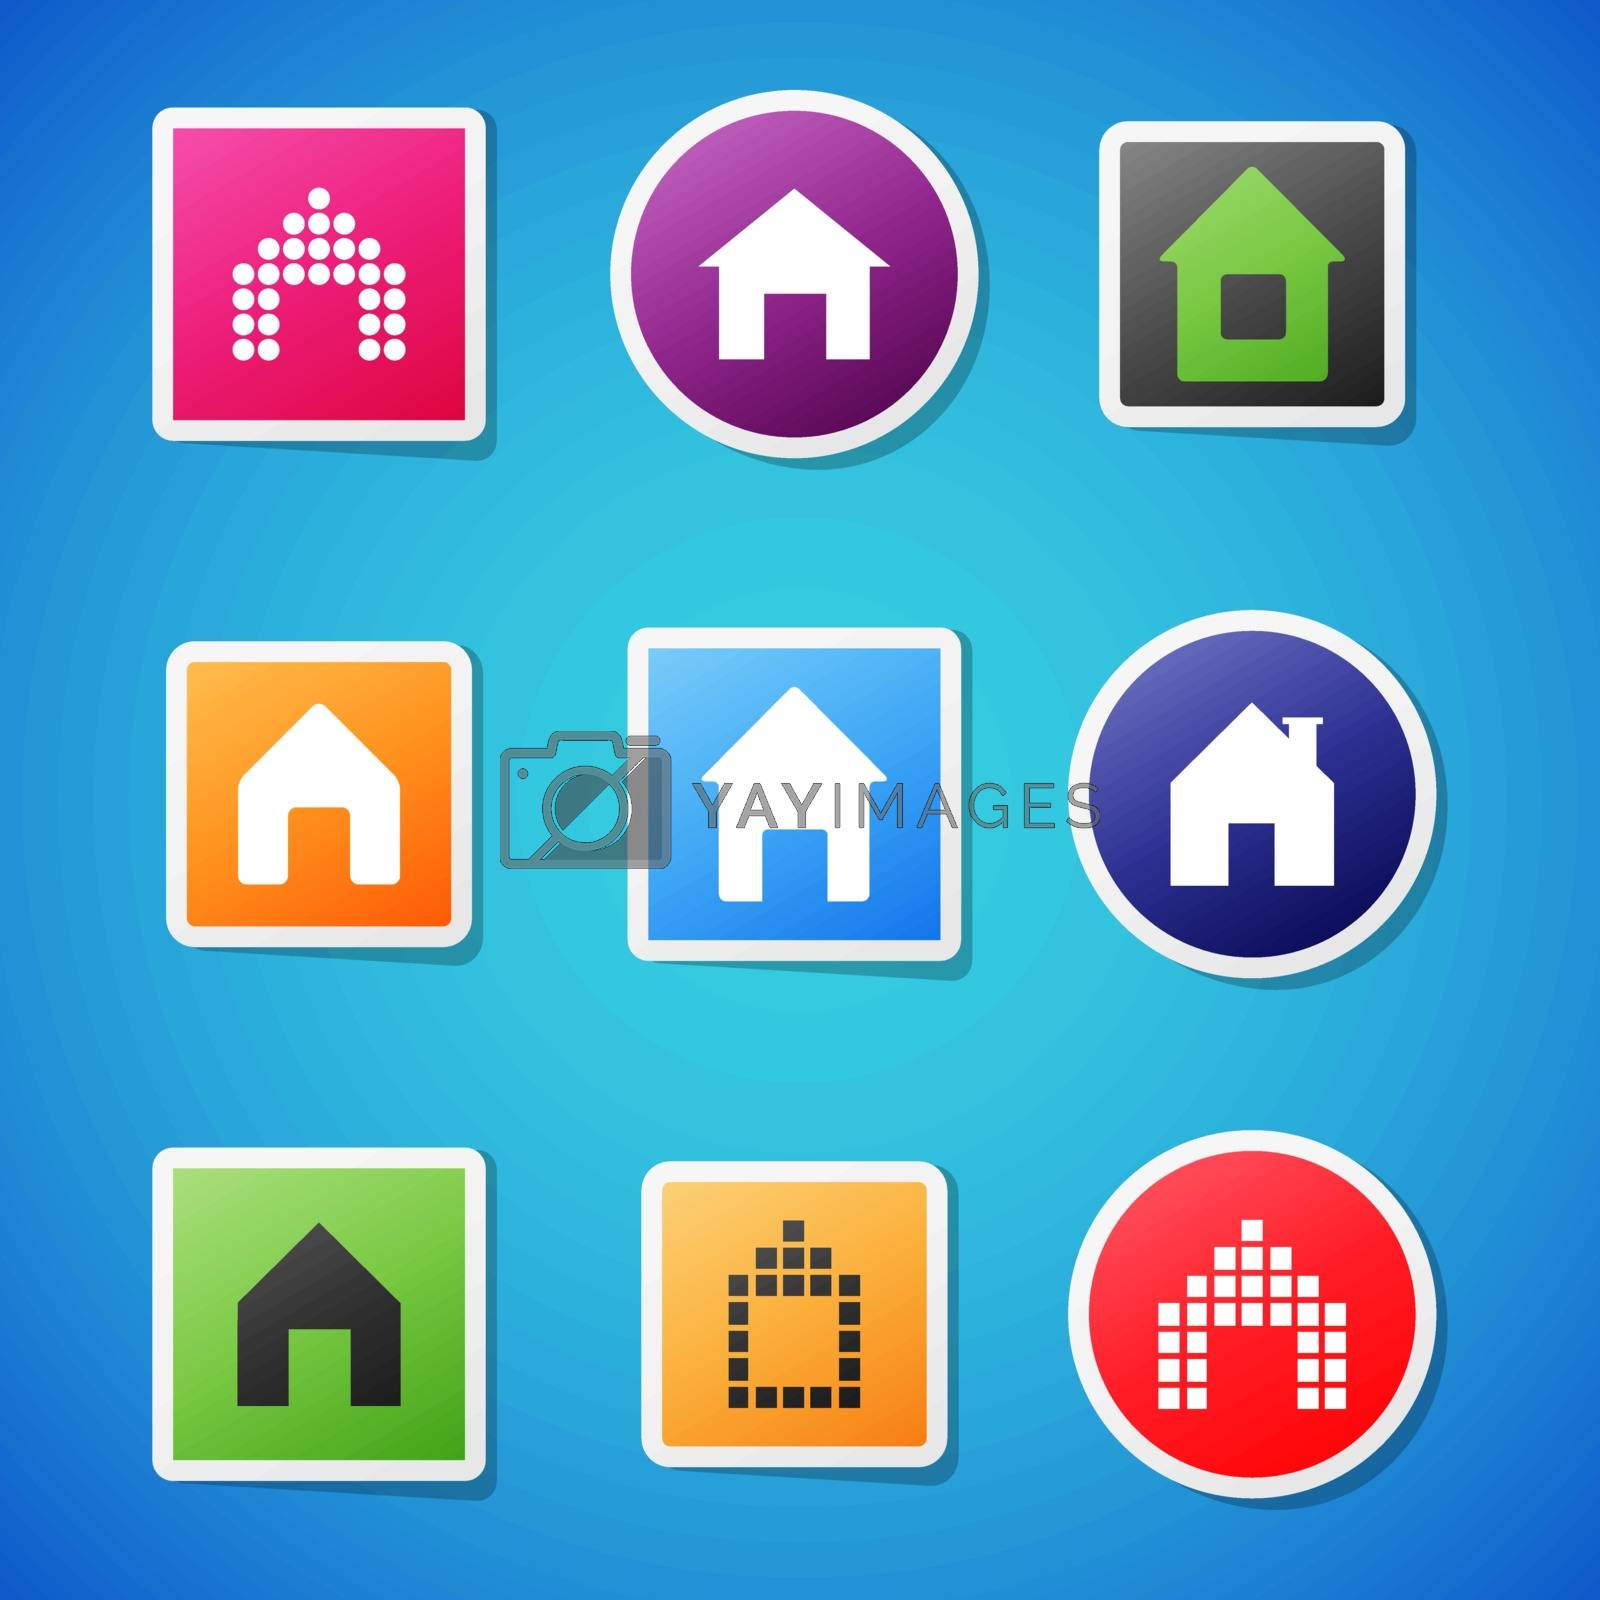 Royalty free image of Vector home icons by ggebl